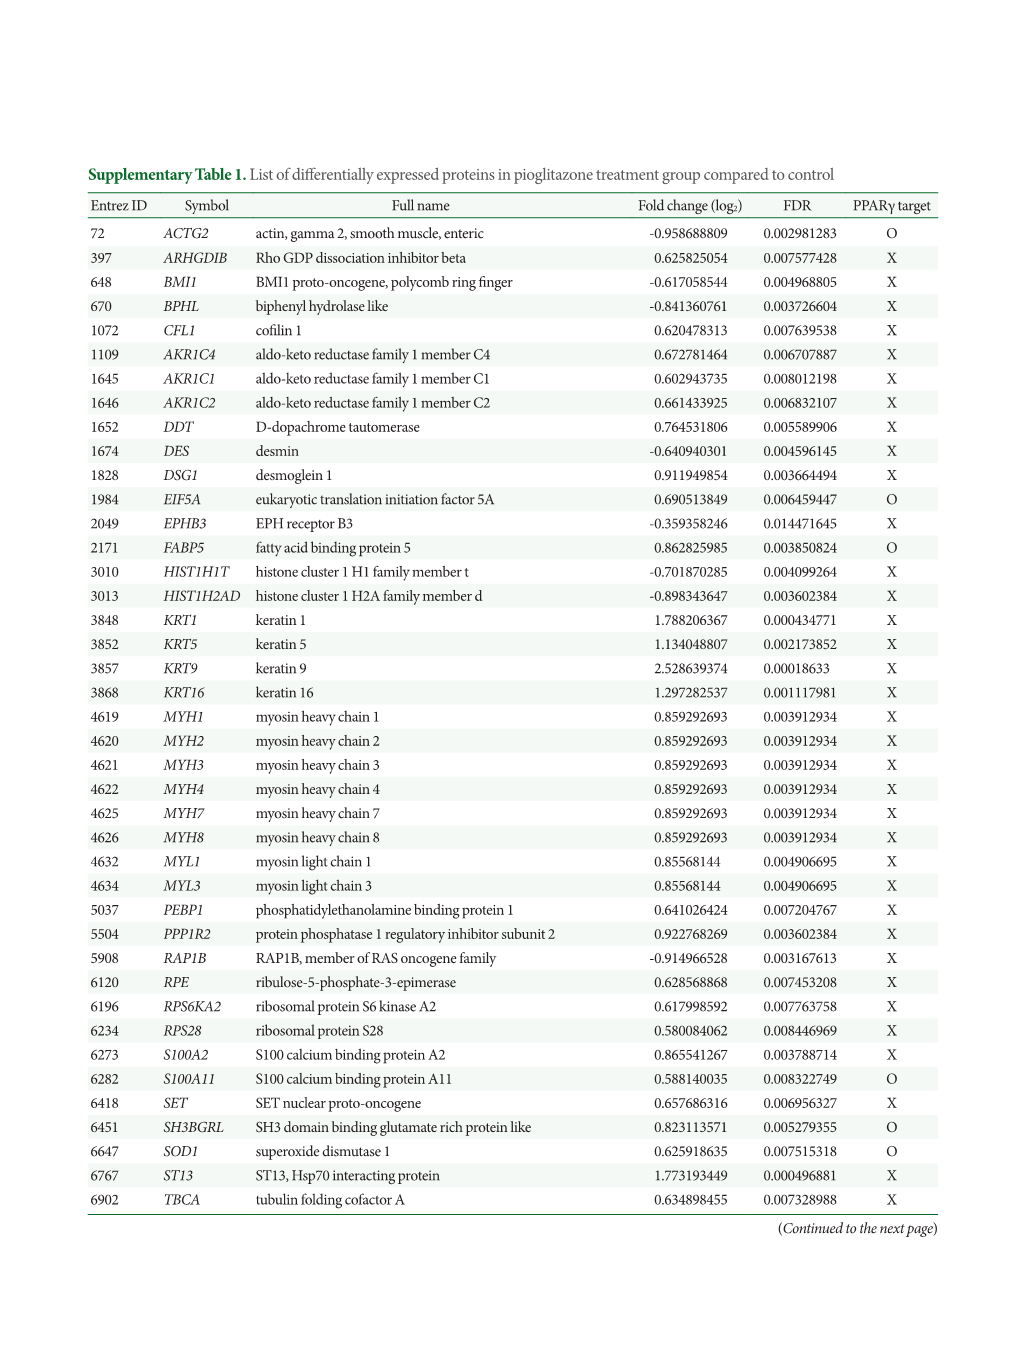 Supplementary Table 1.List of Differentially Expressed Proteins In